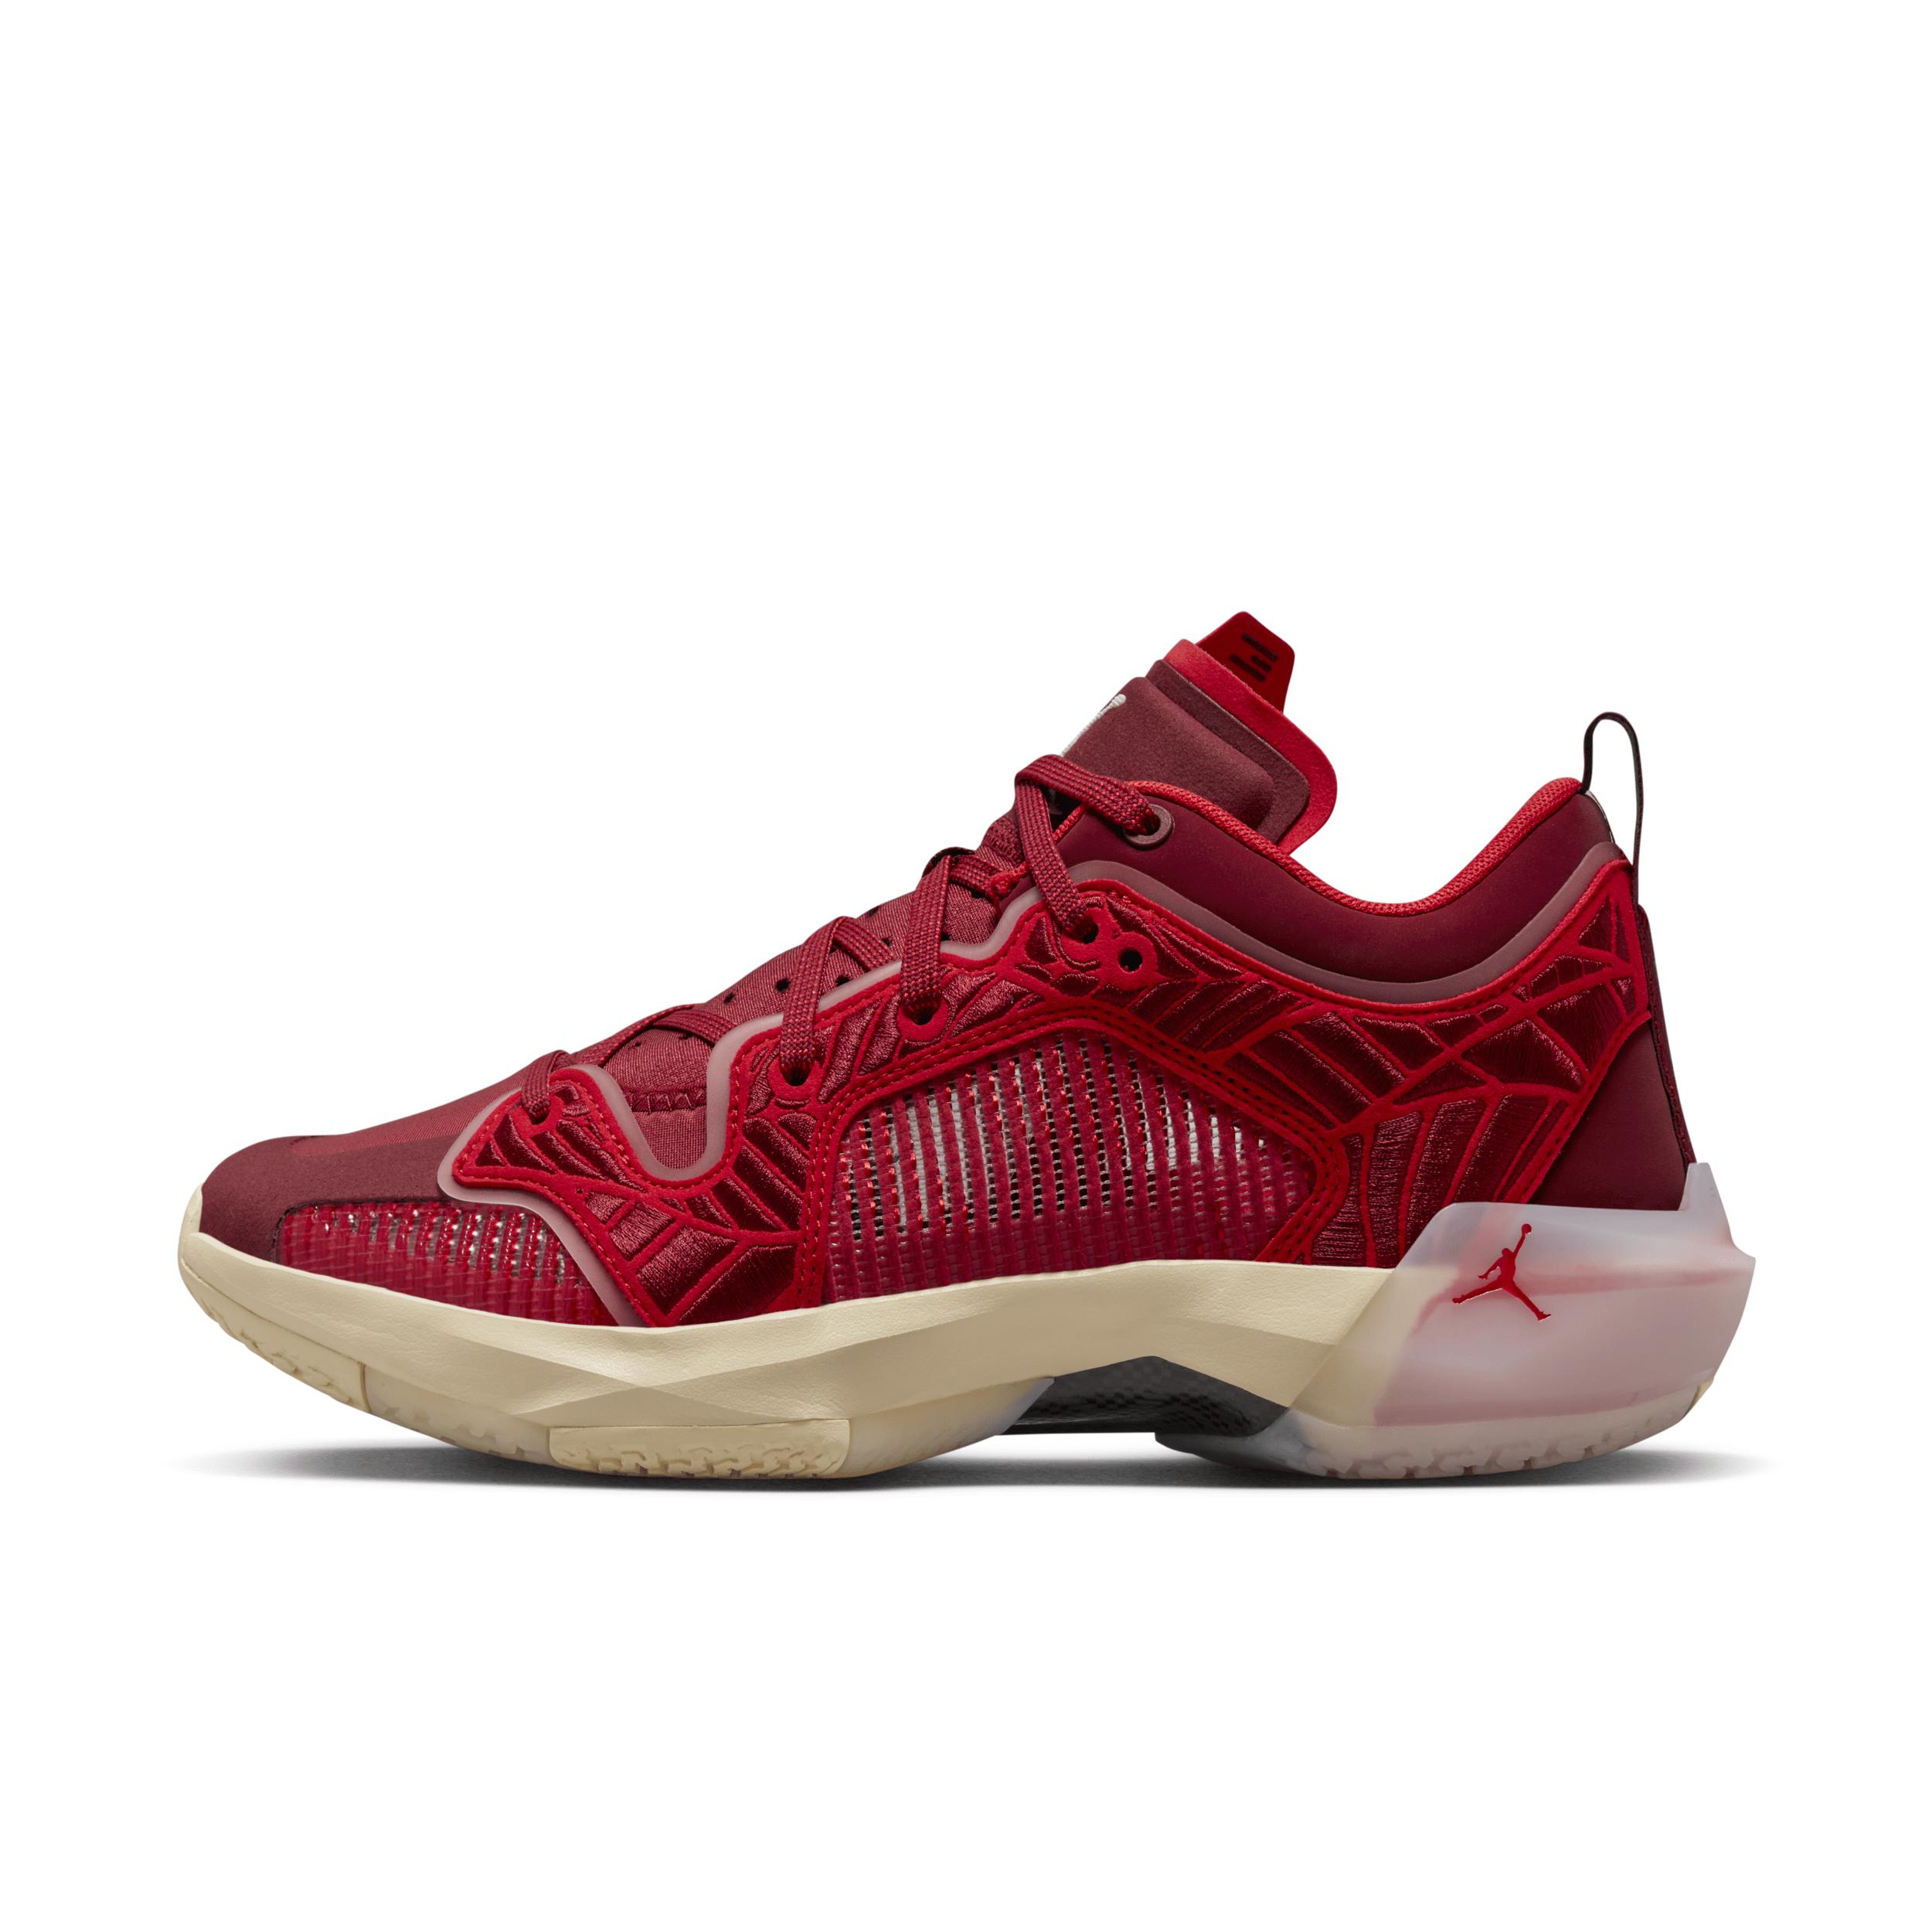 Nike Air Jordan Xxxvii Low Basketball Shoes In Red, | Lyst